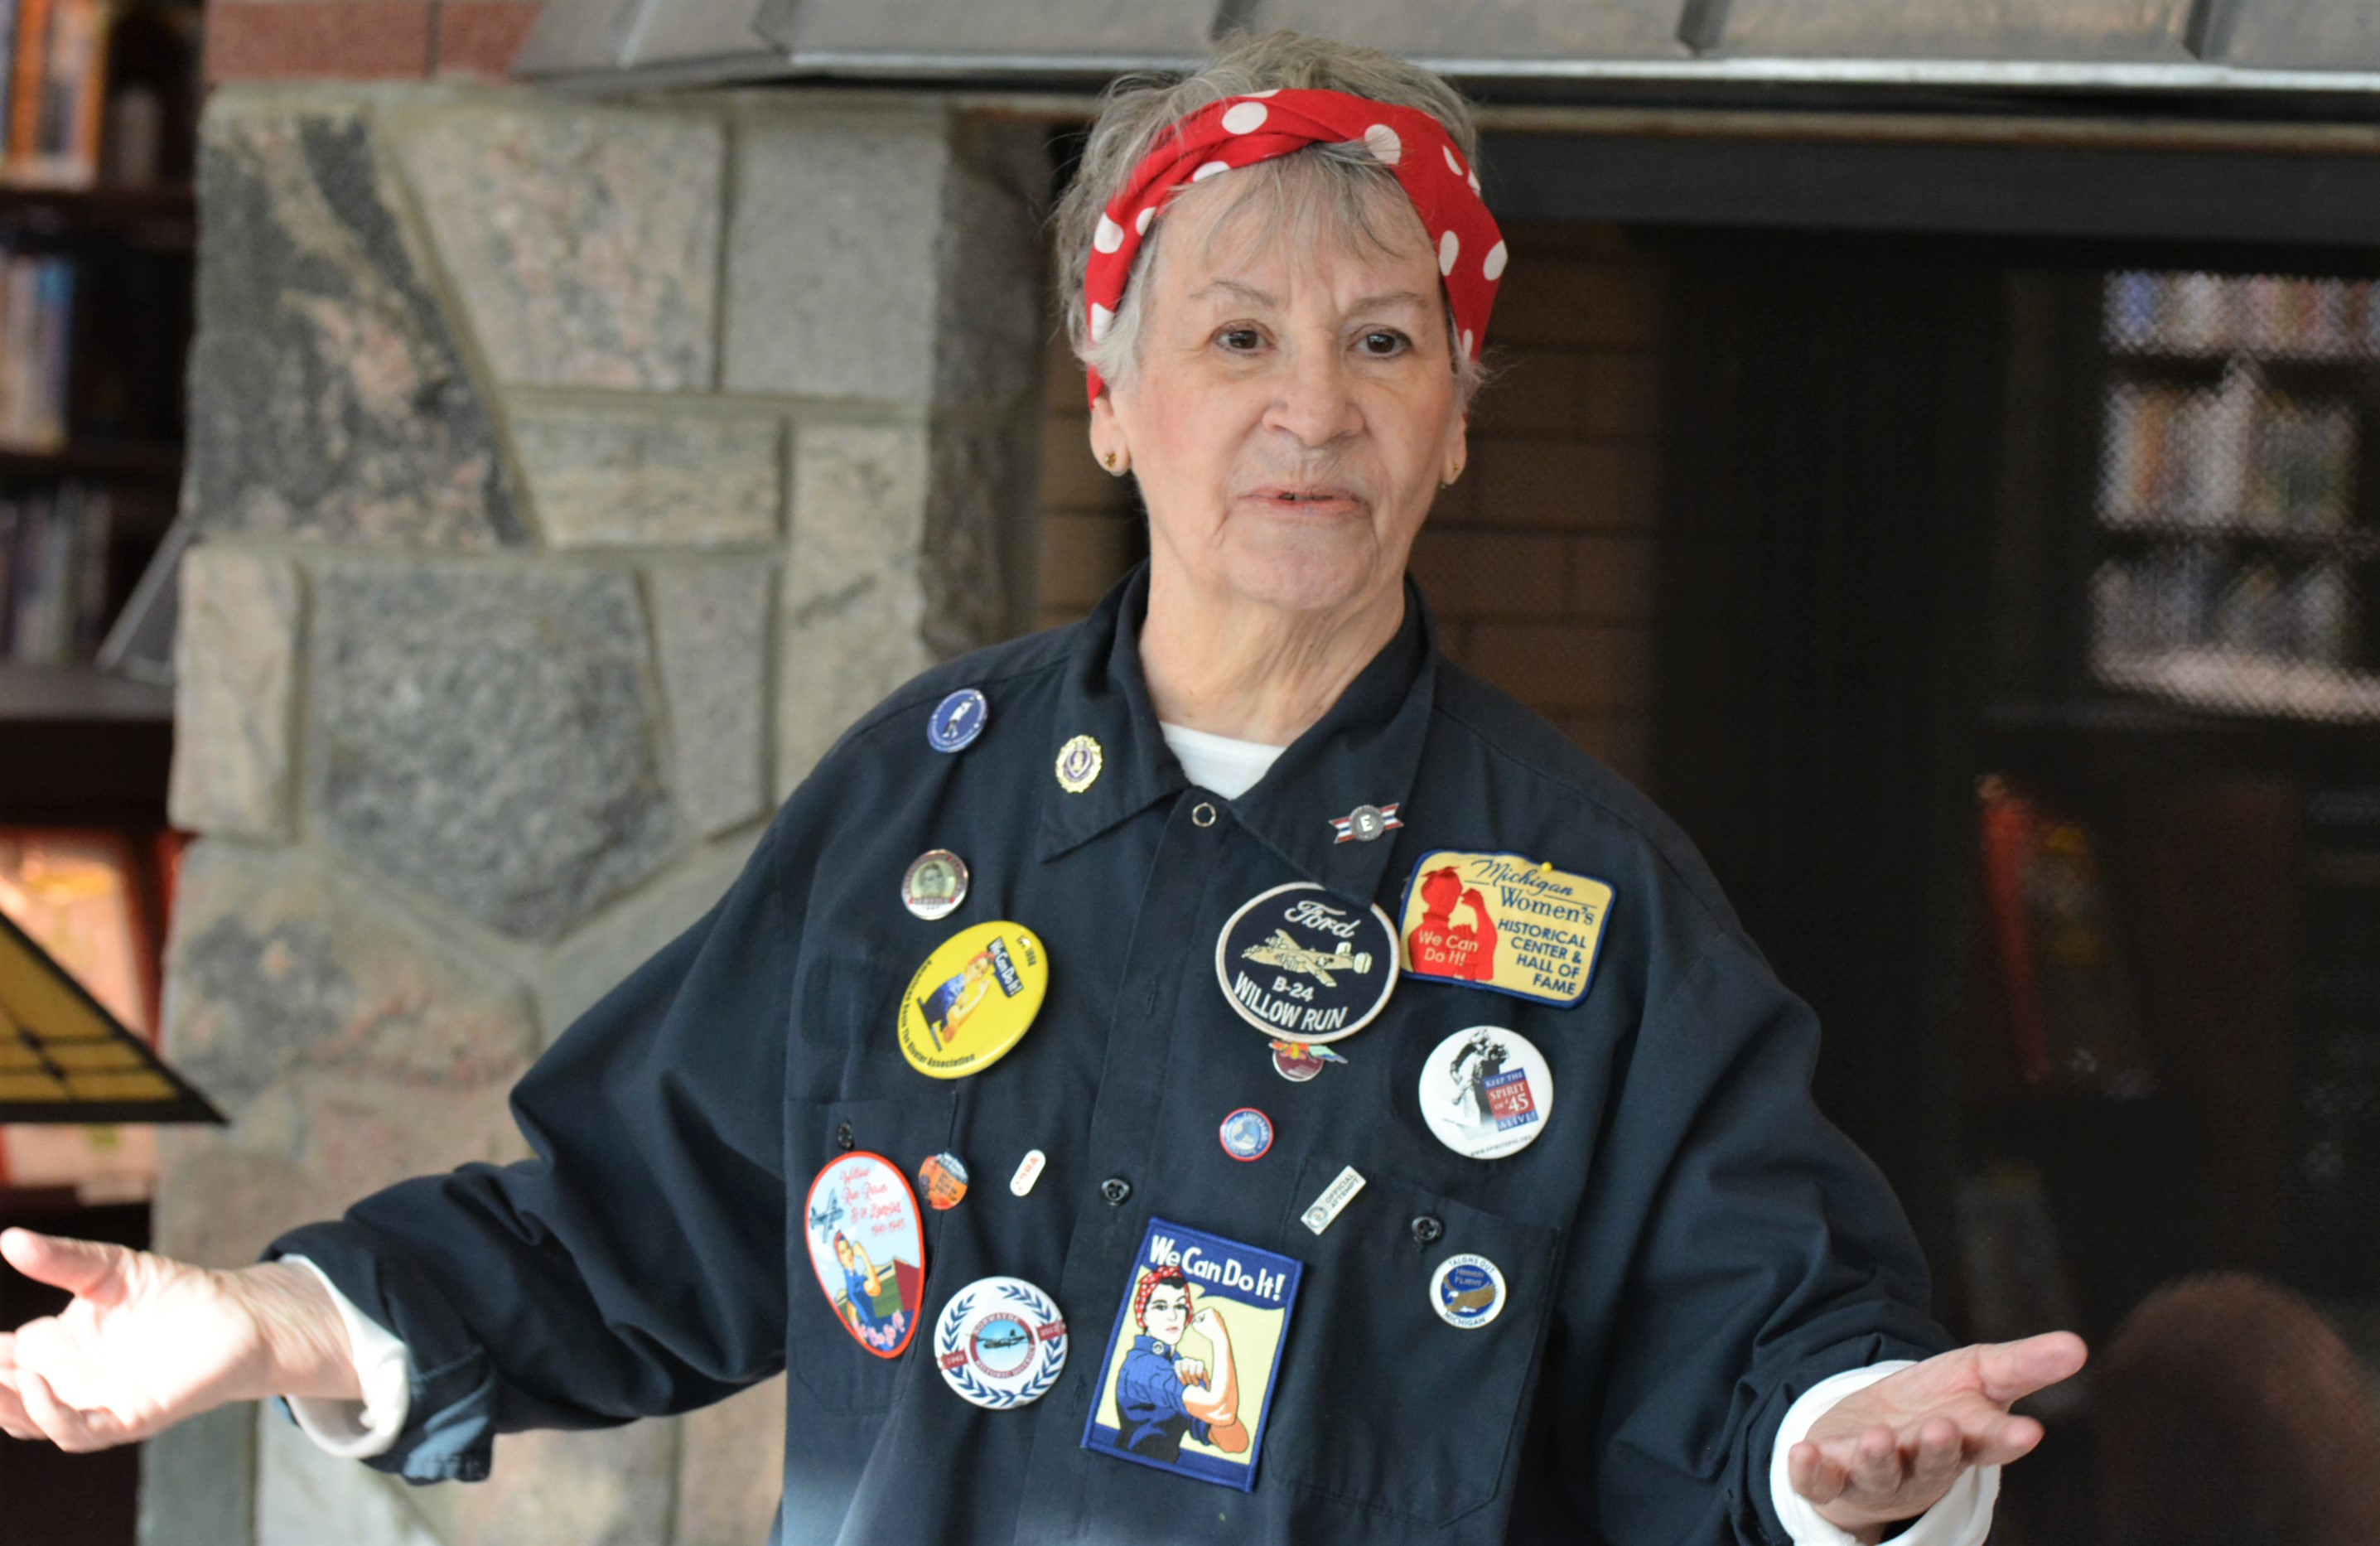 Dressed as the World War II cultural icon that symbolized working women, Donnaleen Lanktree, president of the American Rosie the Riveter Association, speaks during a fireside chat held Friday at the Oxford Public Library. Photo by C.J. Carnacchio.